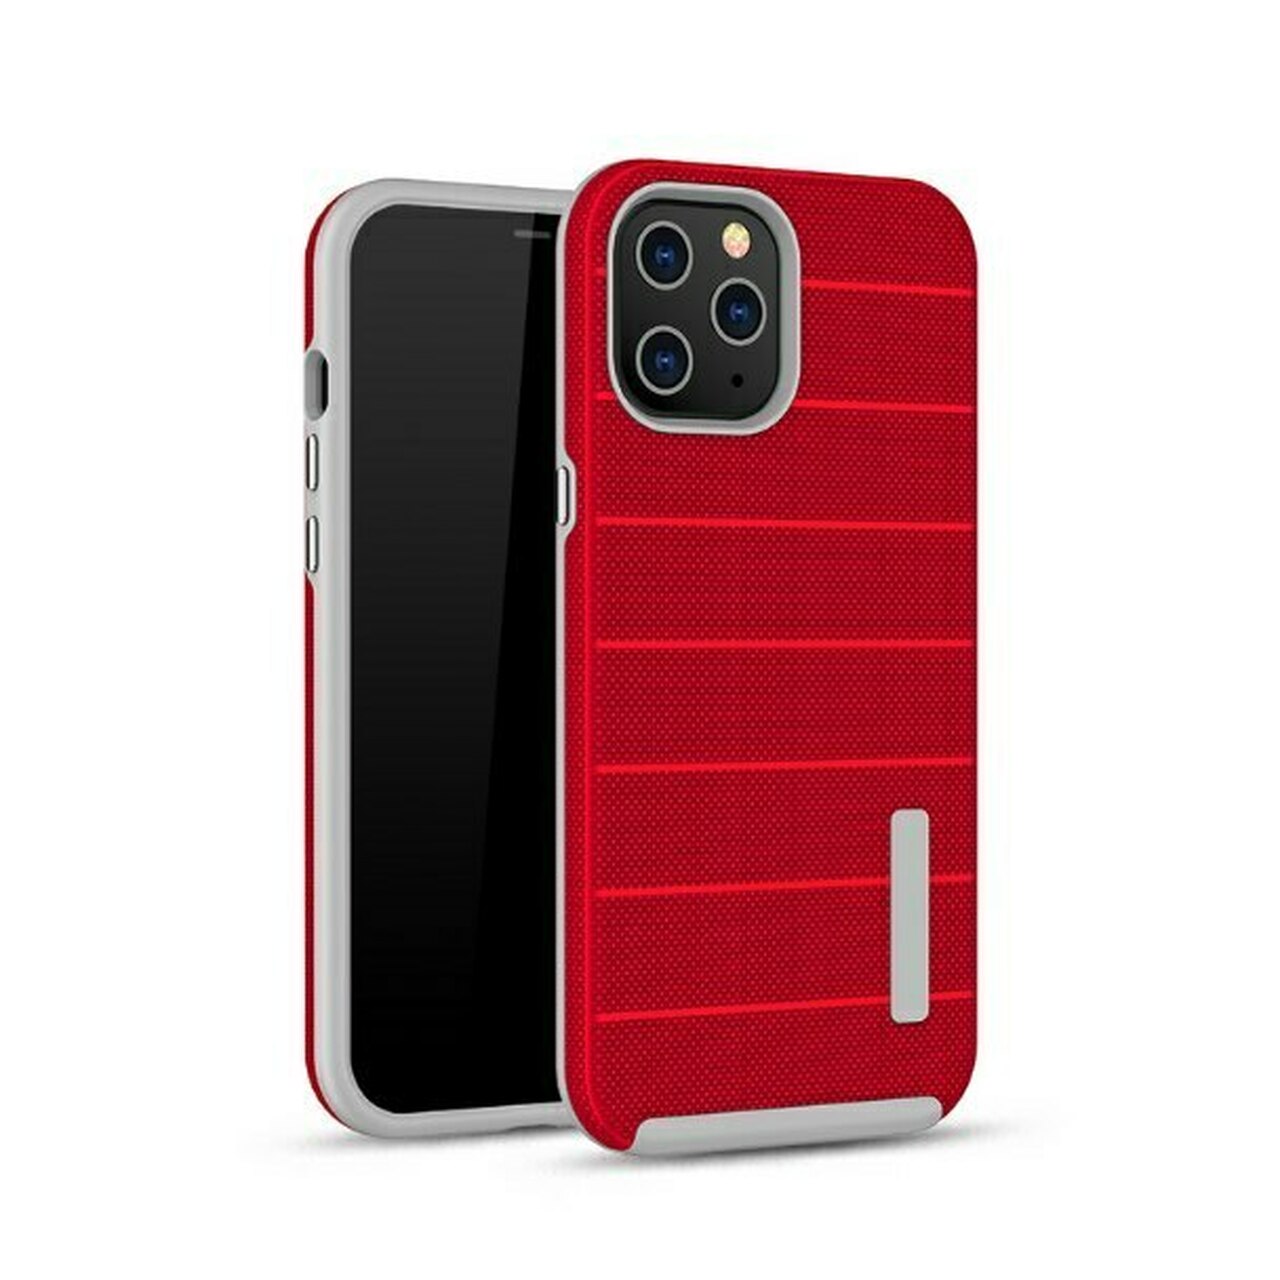 Caseology Hard Shell Fashion Case for iPhone 11 Pro Max